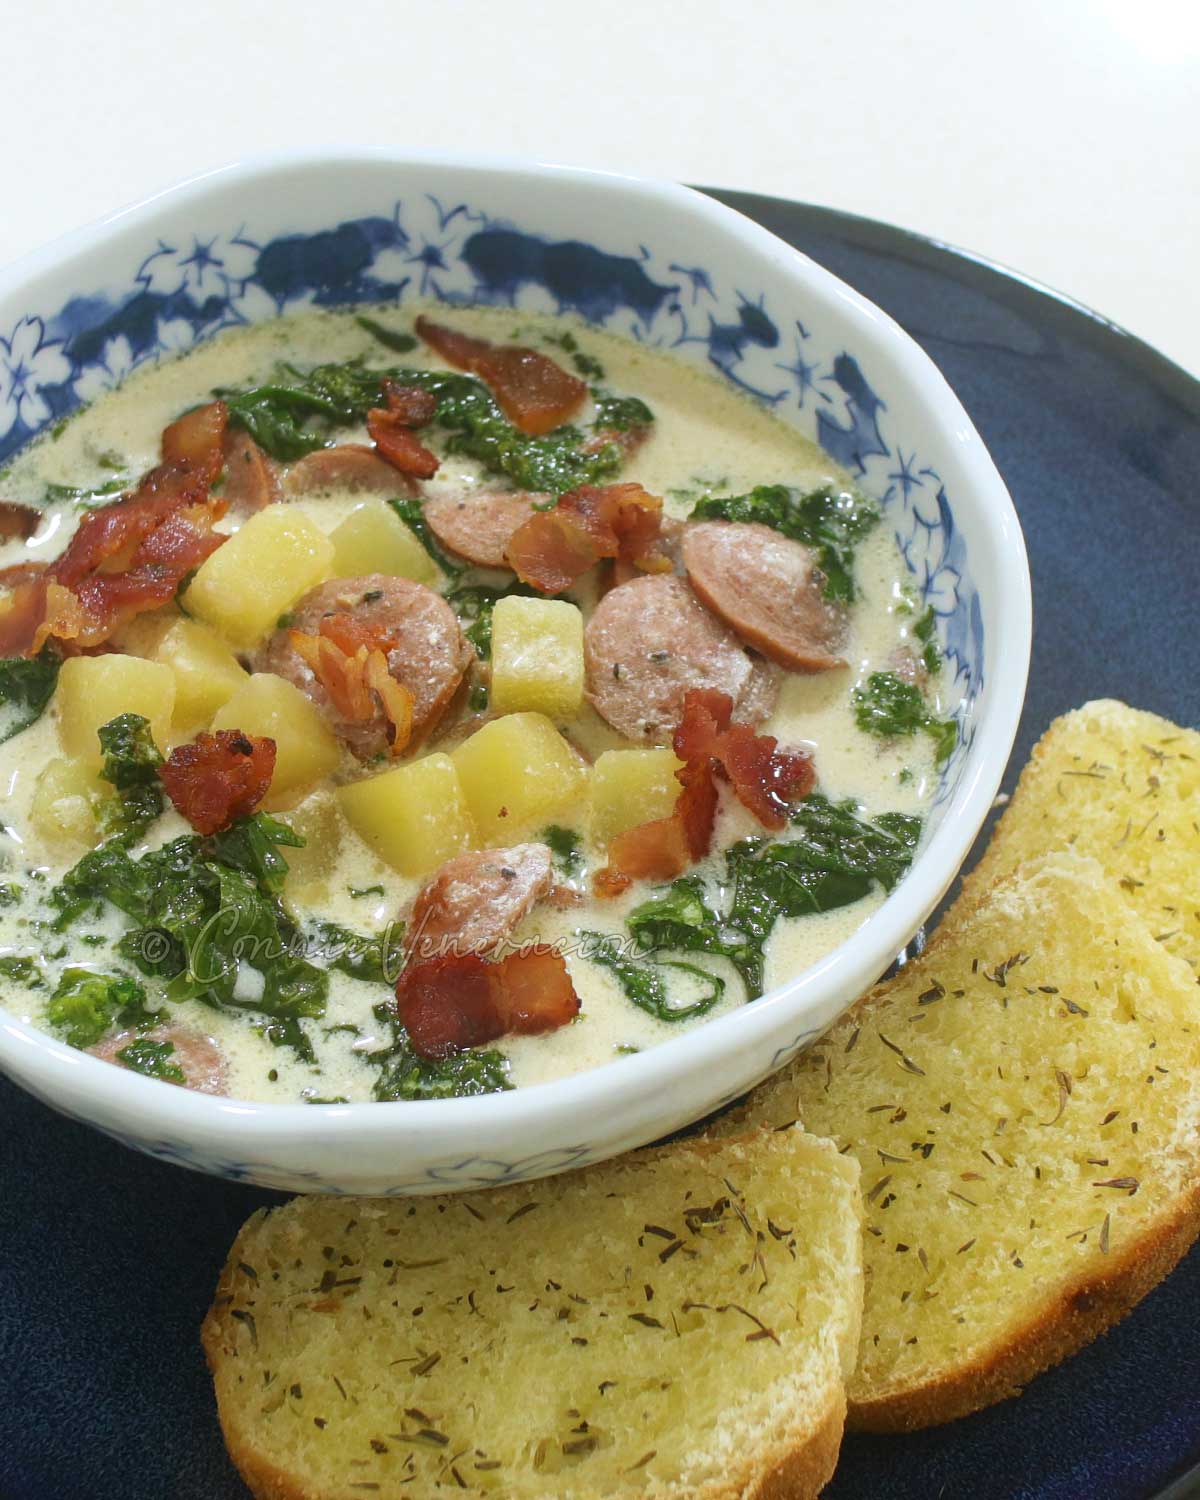 Kale, sausage and potato soup (zuppa Toscana) with buttered toast on the side